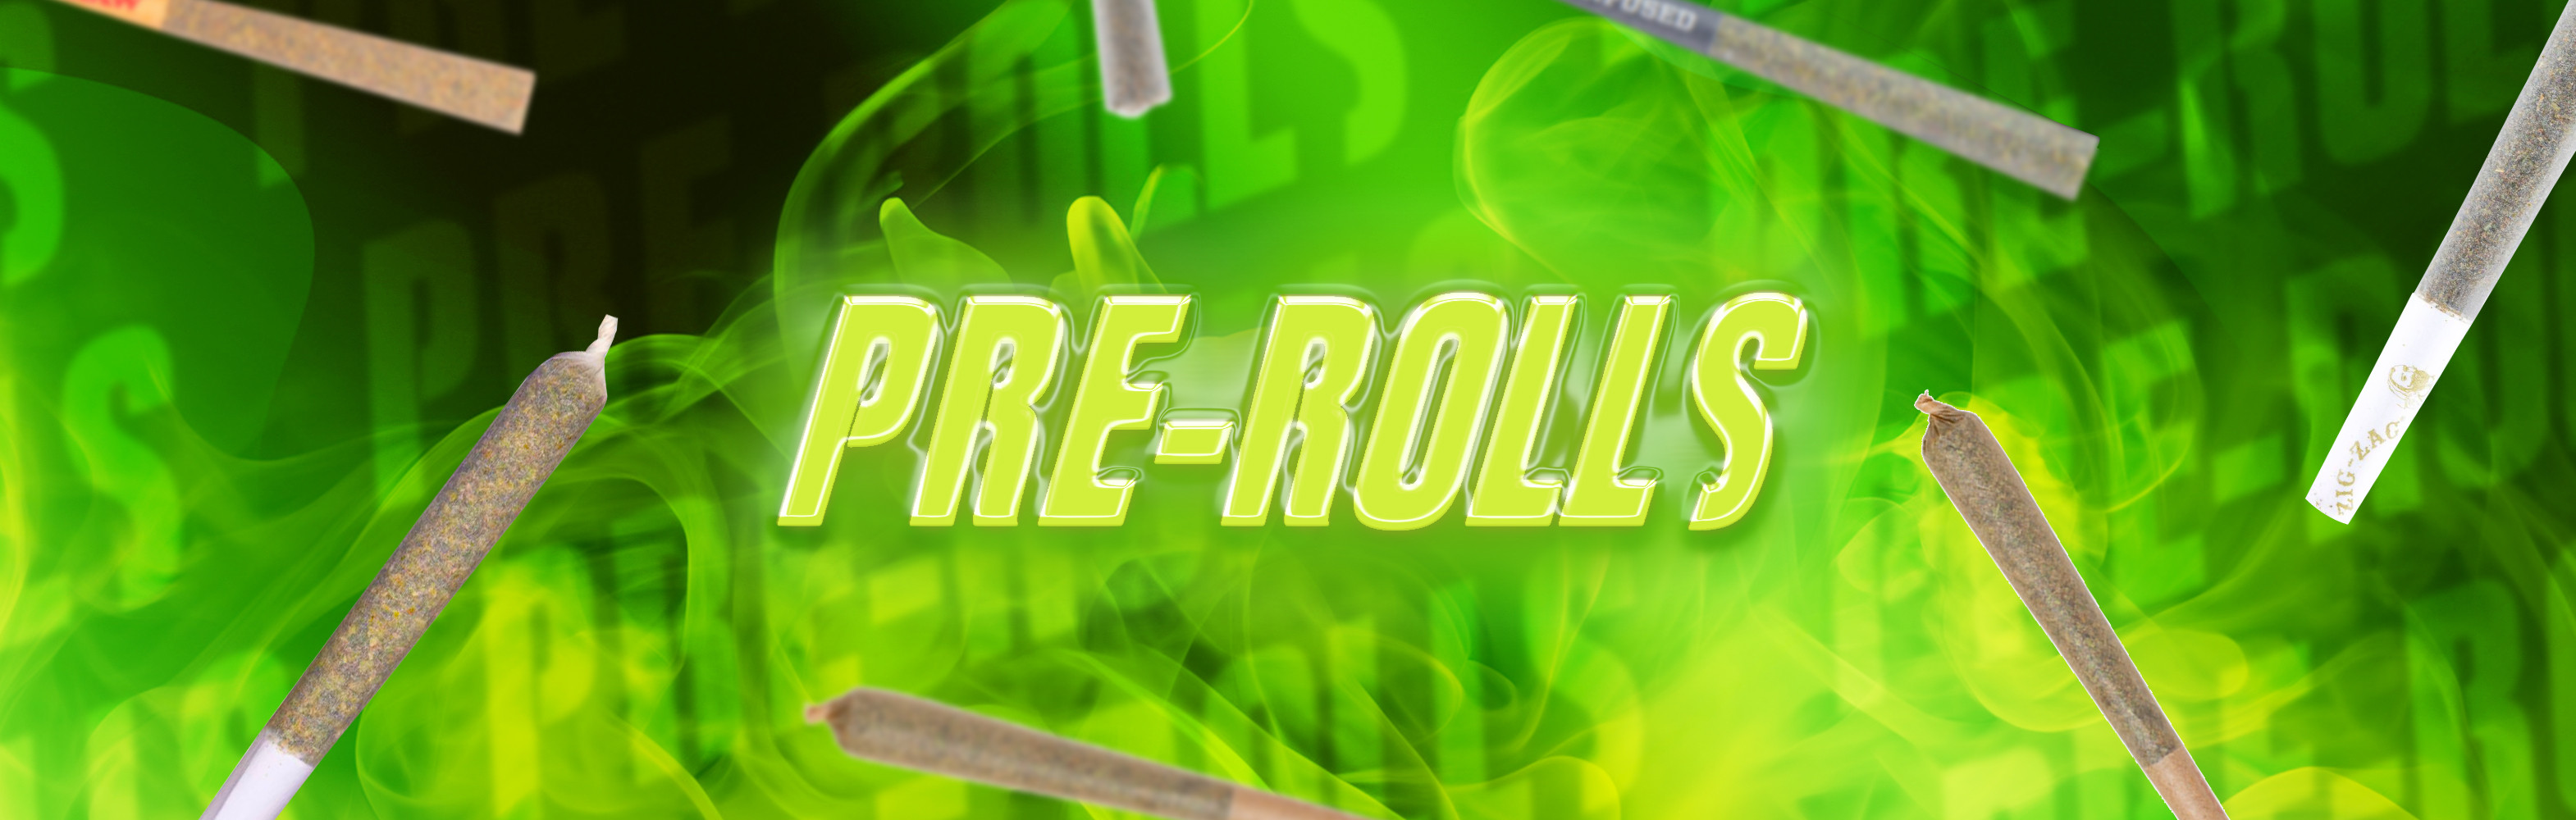 Pre-Roll-1740-3.png__PID:c6706970-b931-4138-8456-82c82afe5a00